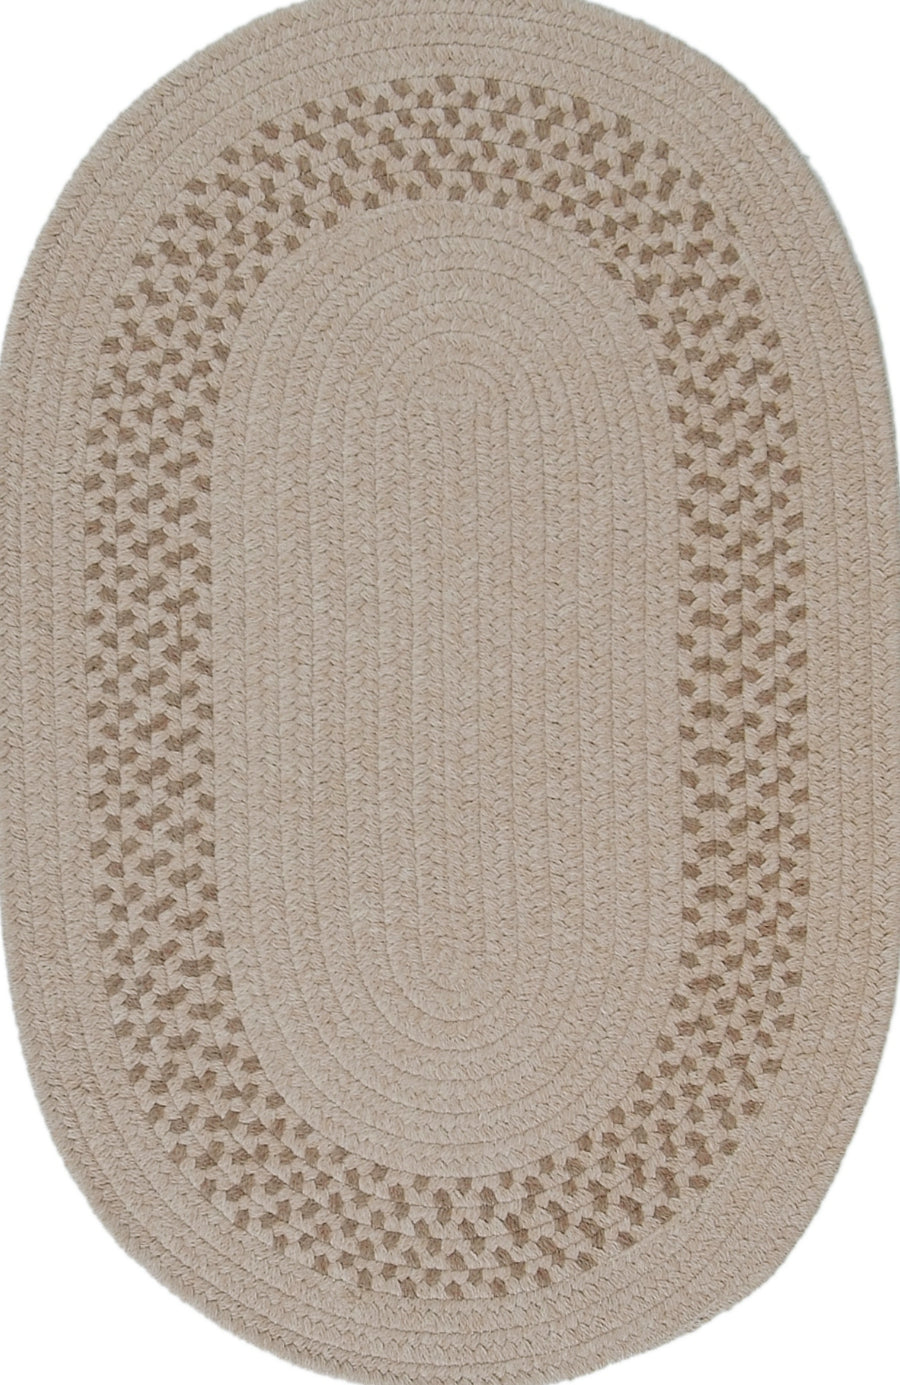 Colonial Mills Grano GN80 Oatmeal Area Rug